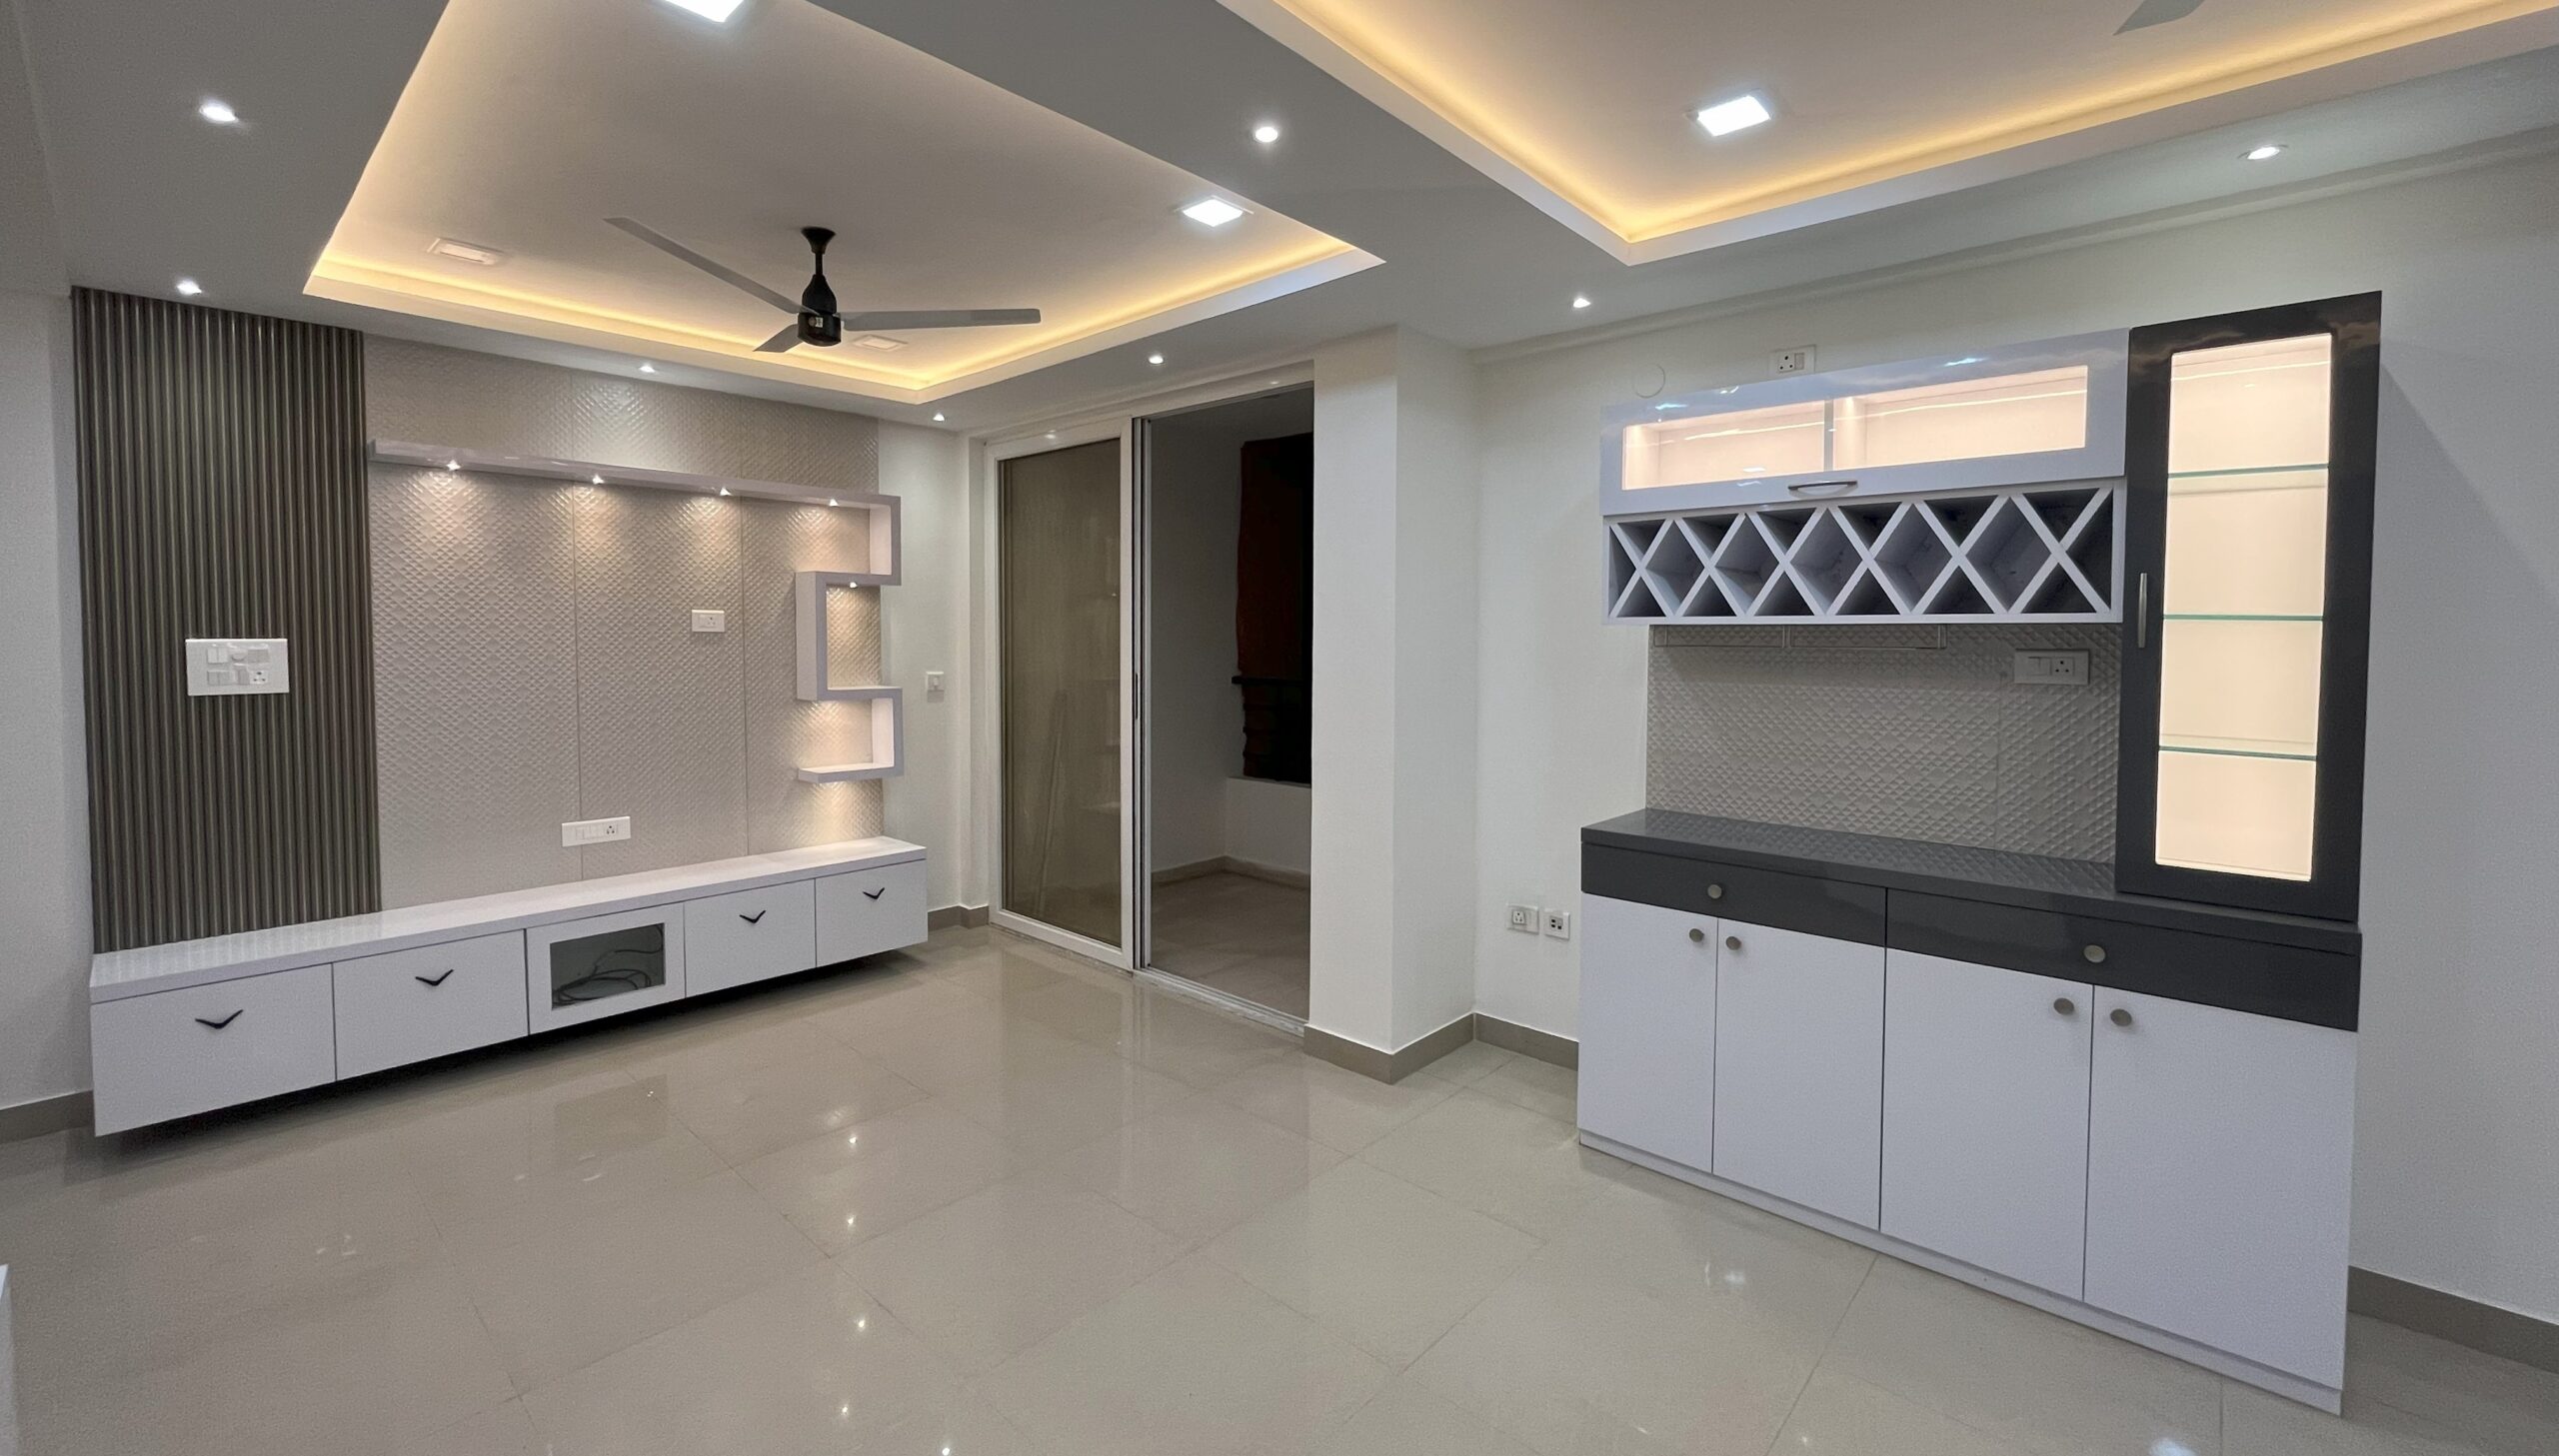 An Amazing 3 BHK Renovation in DN Oxy Apartment, Bhubaneswar